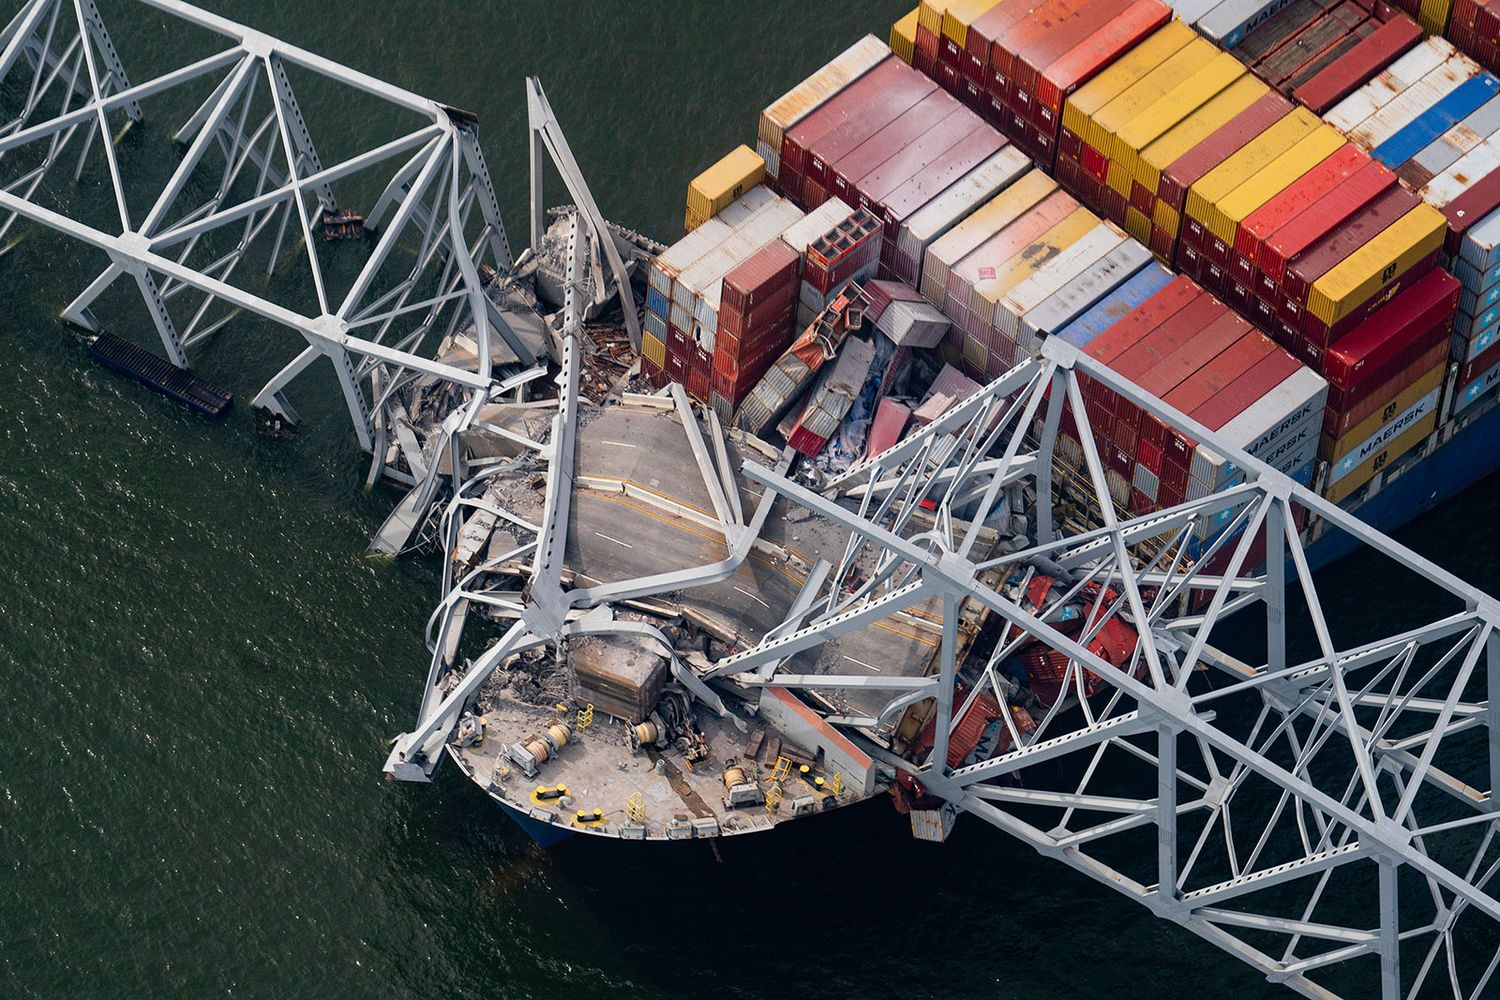 The Dali container vessel after striking the Francis Scott Key Bridge that collapsed into the Patapsco River in Baltimore, Maryland,